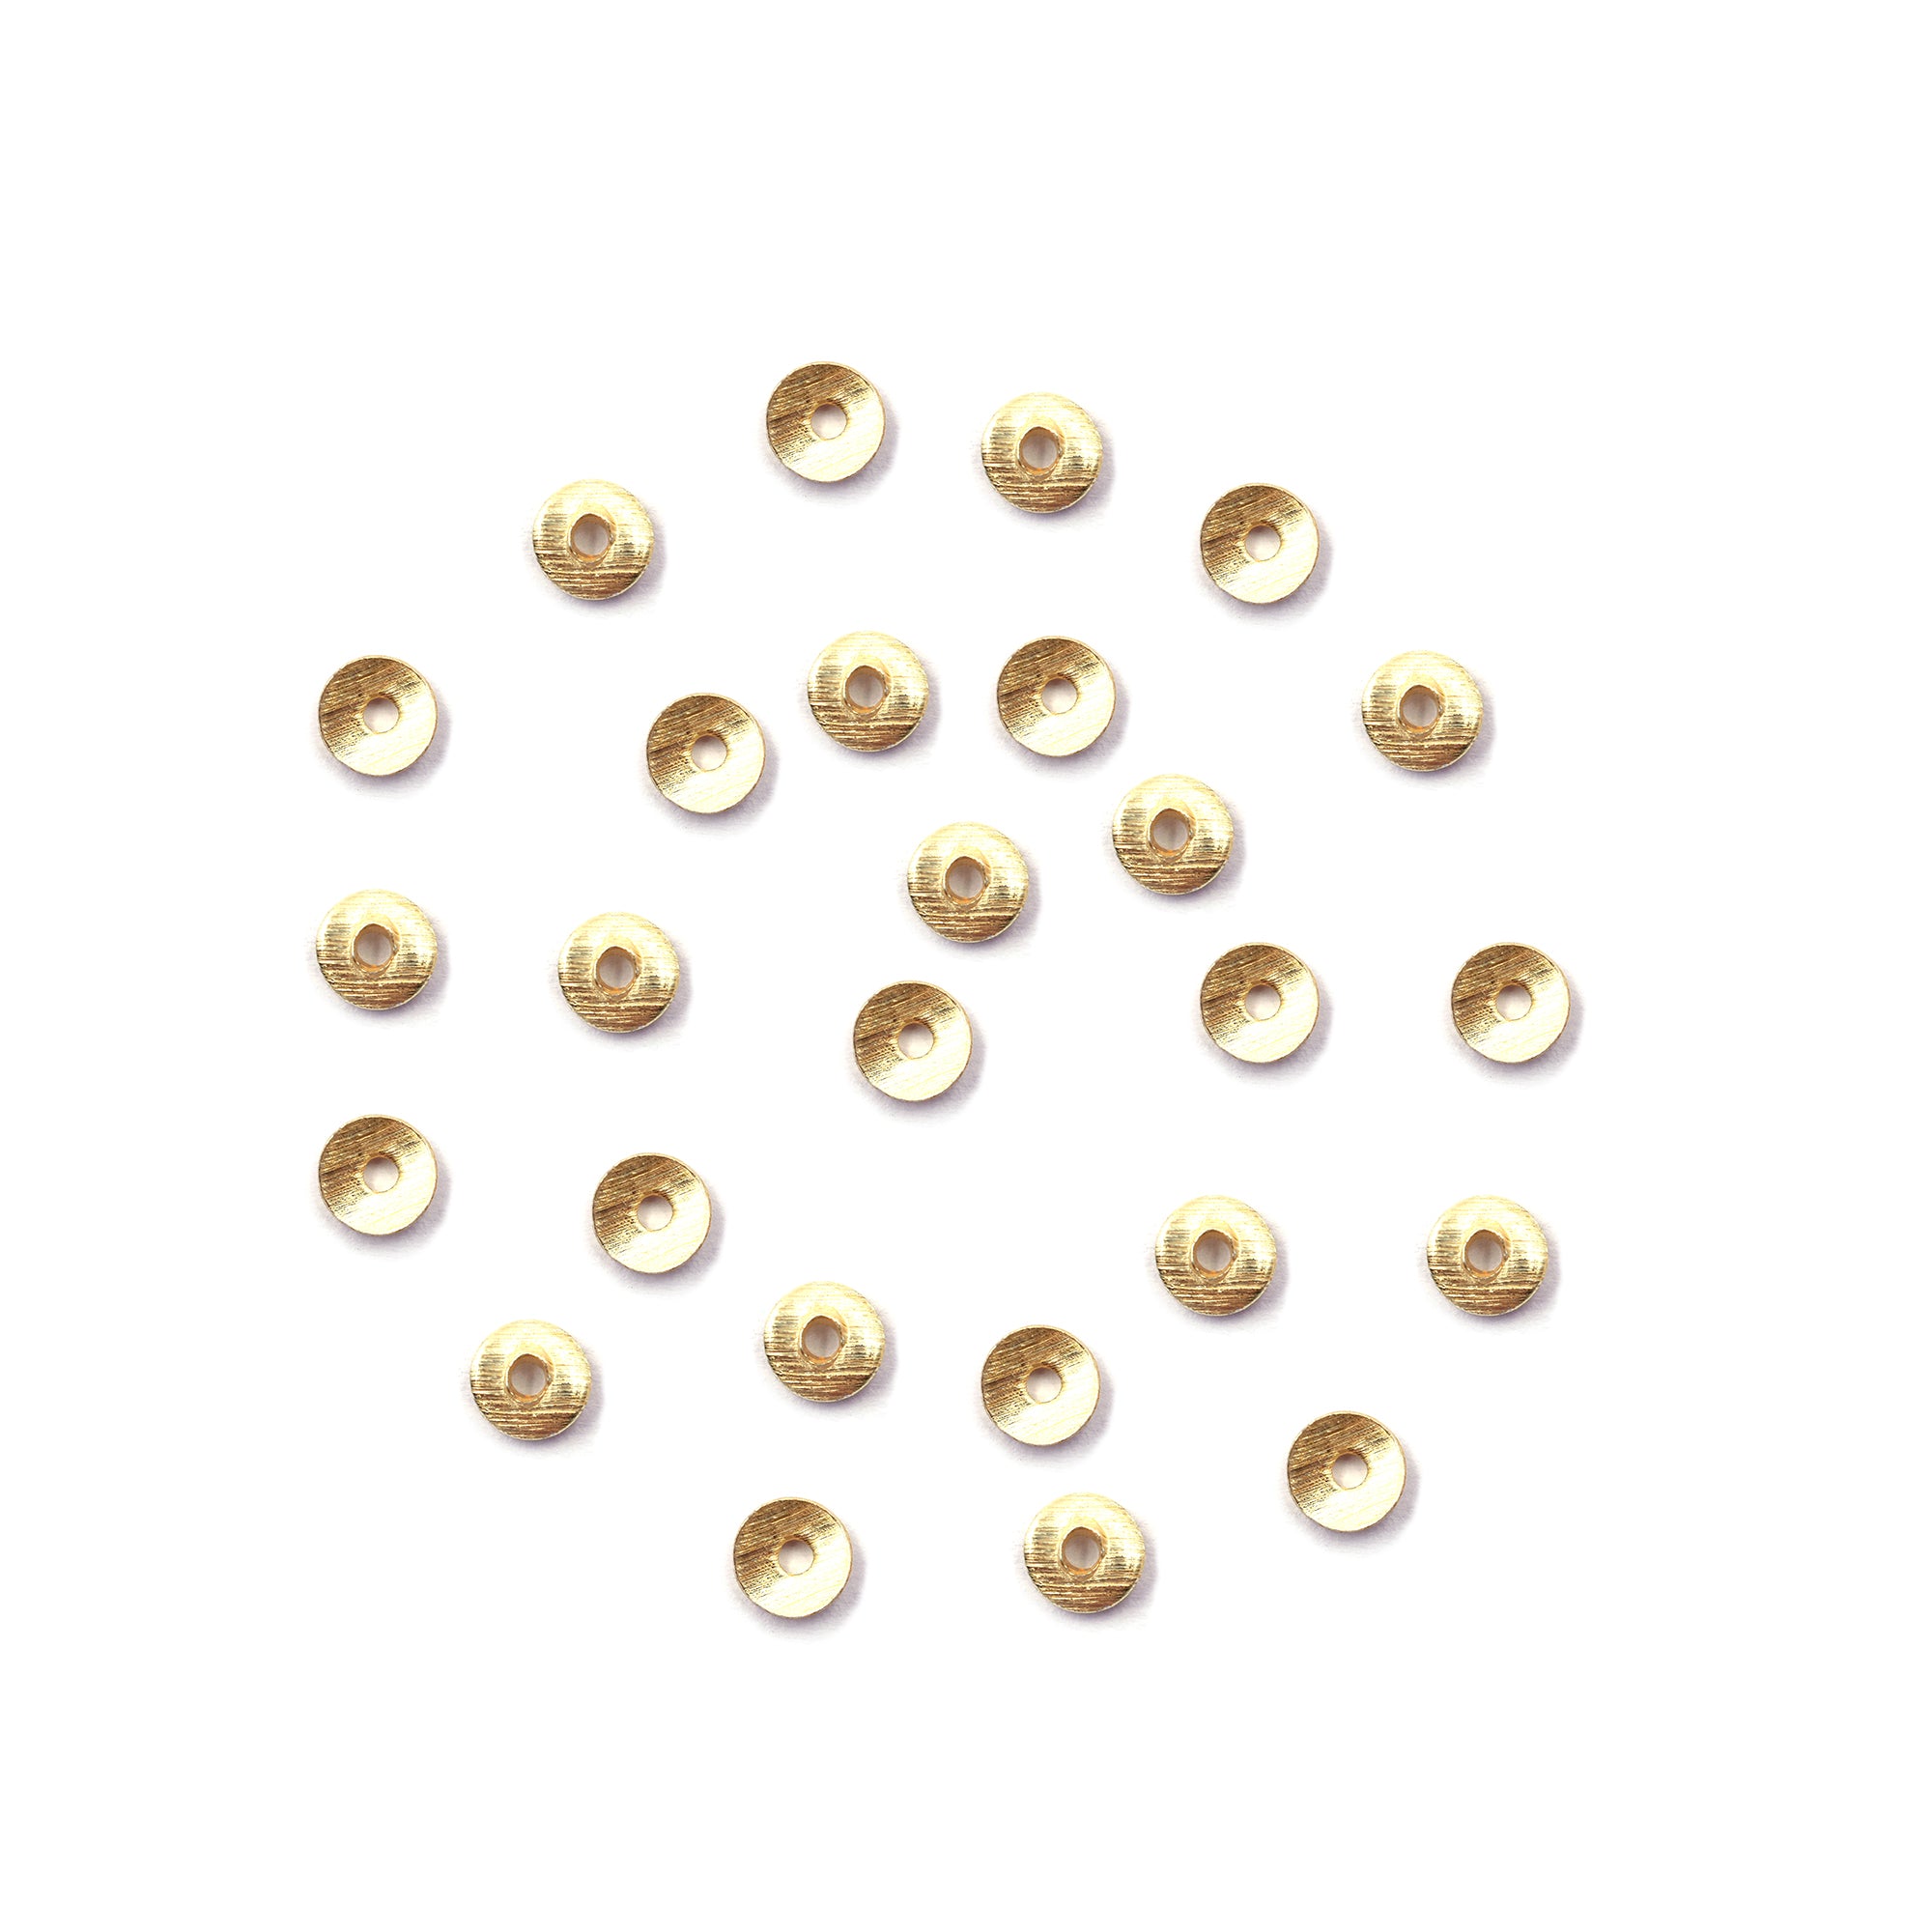 160 Pcs 4mm Wavy Disc Brushed Matte Finish Beads Gold Plated Copper